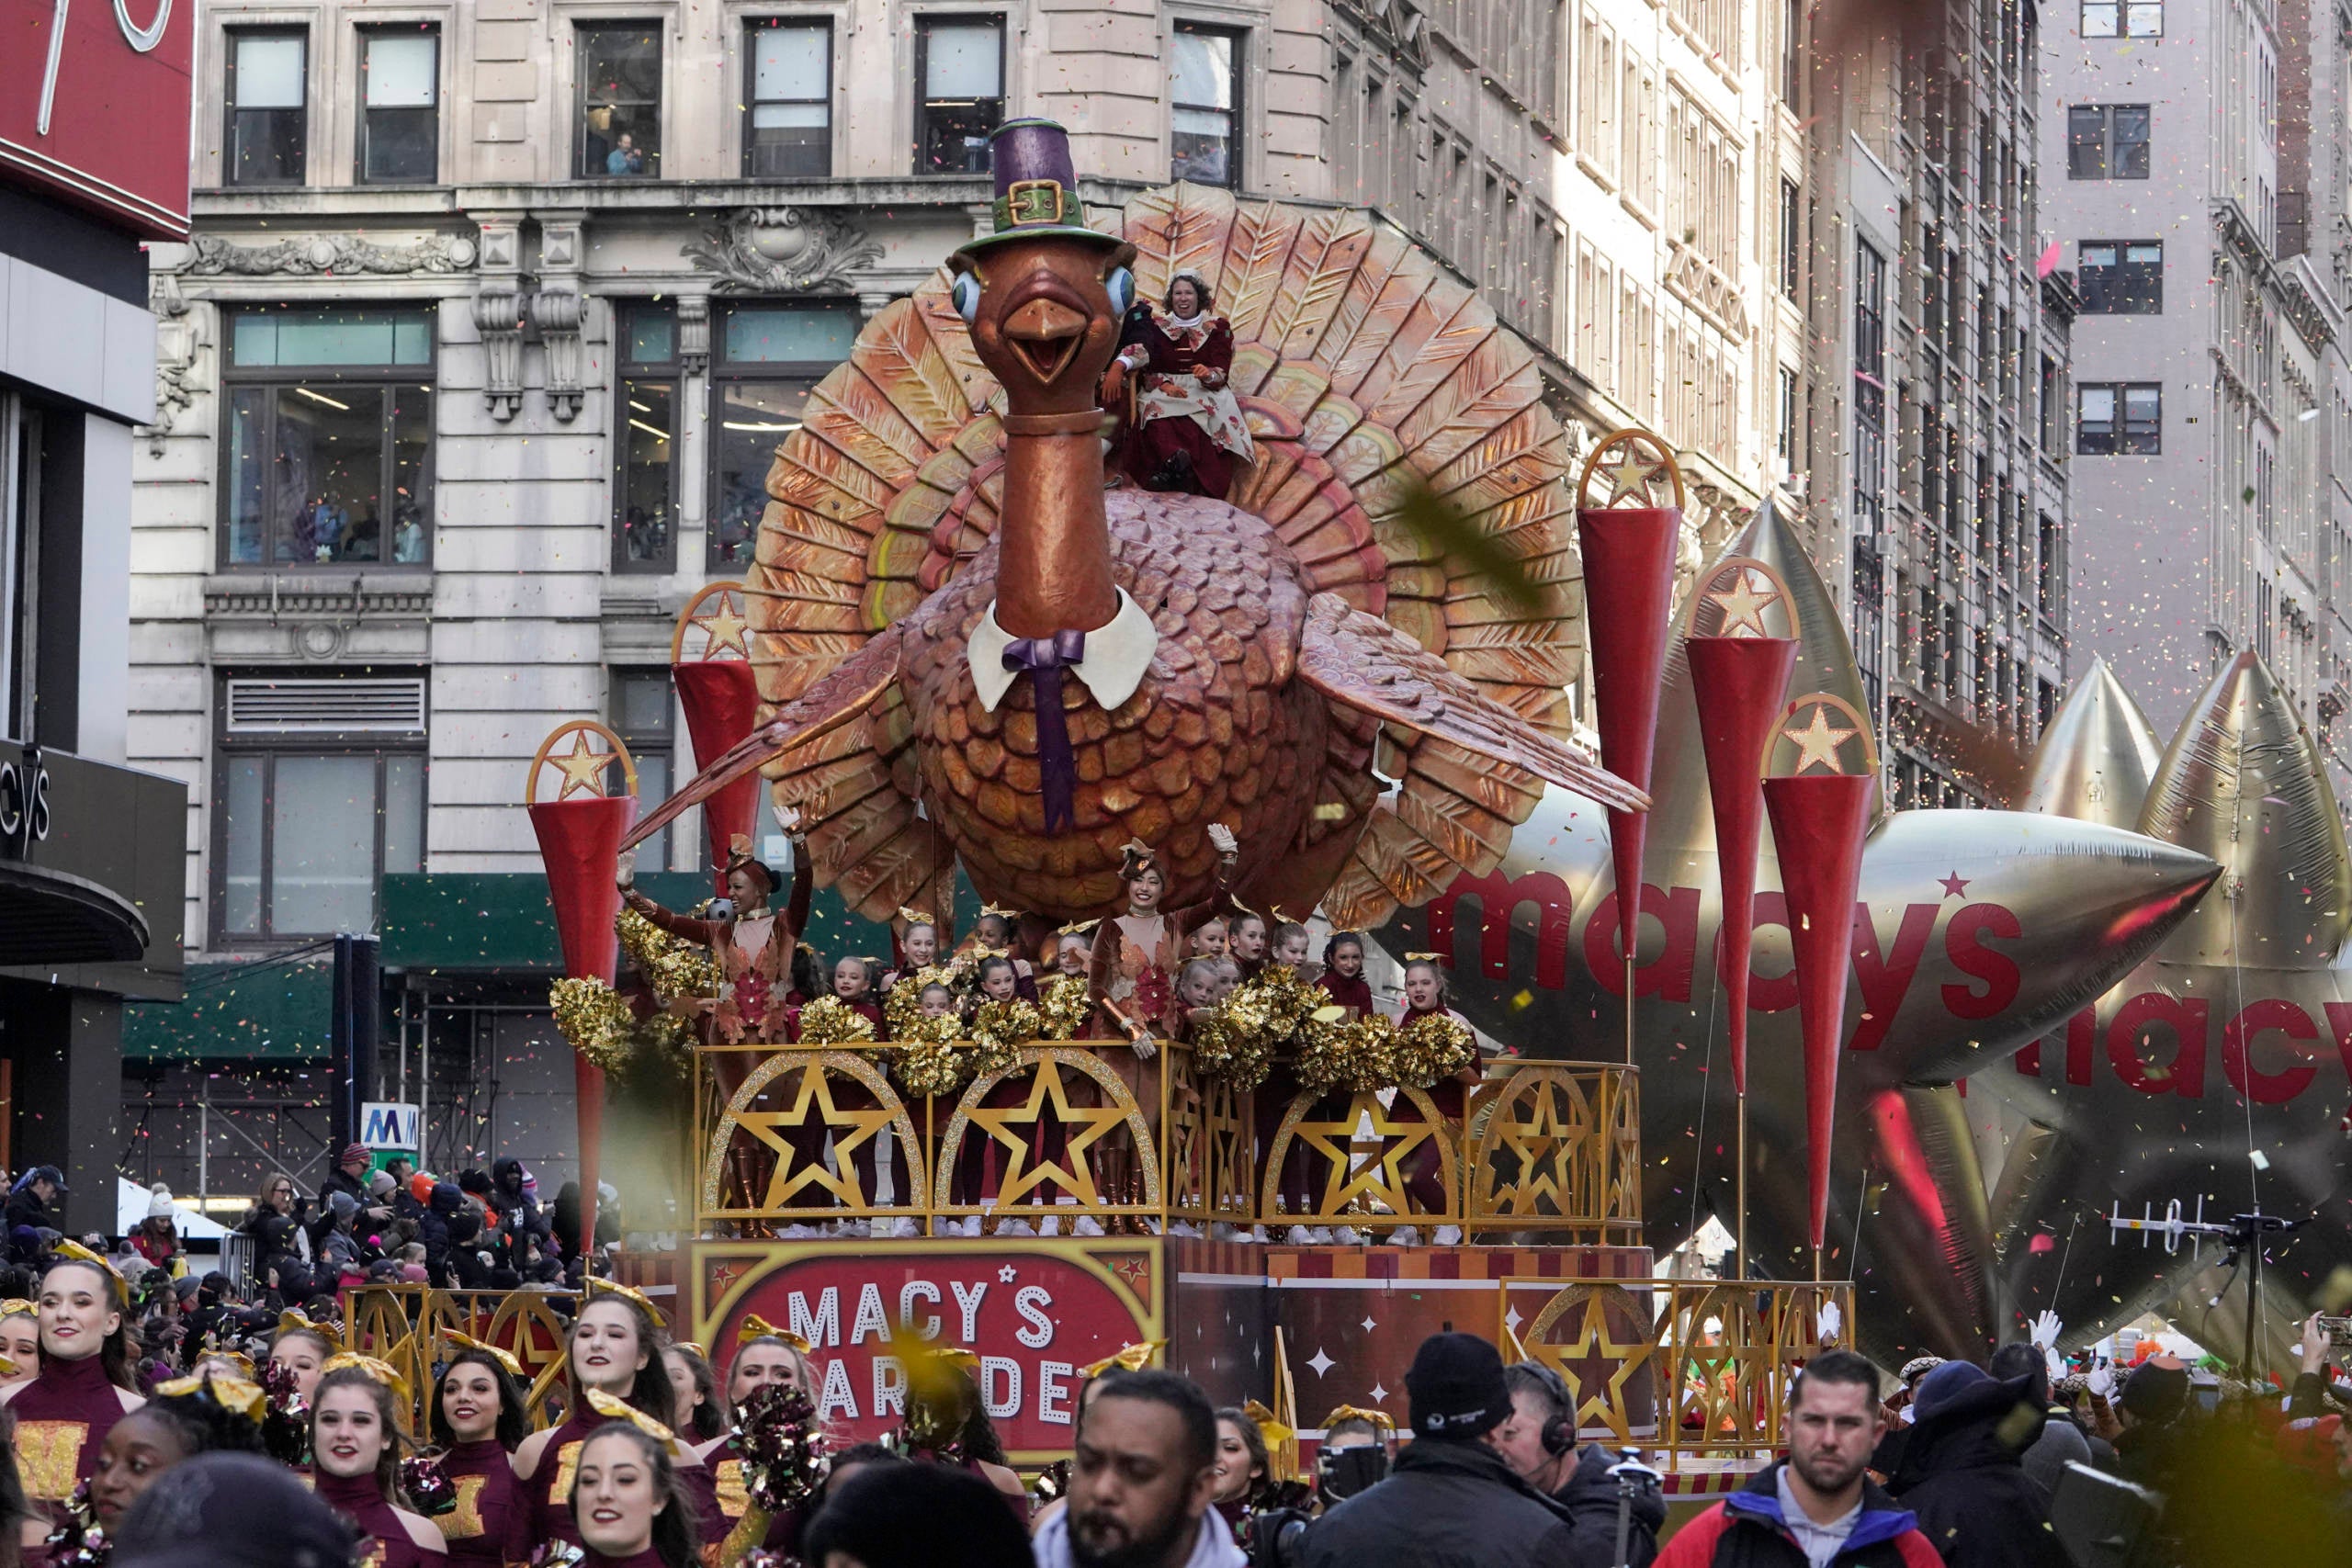 You’ll be able to see Macy’s Thanksgiving Day Parade in-person this year